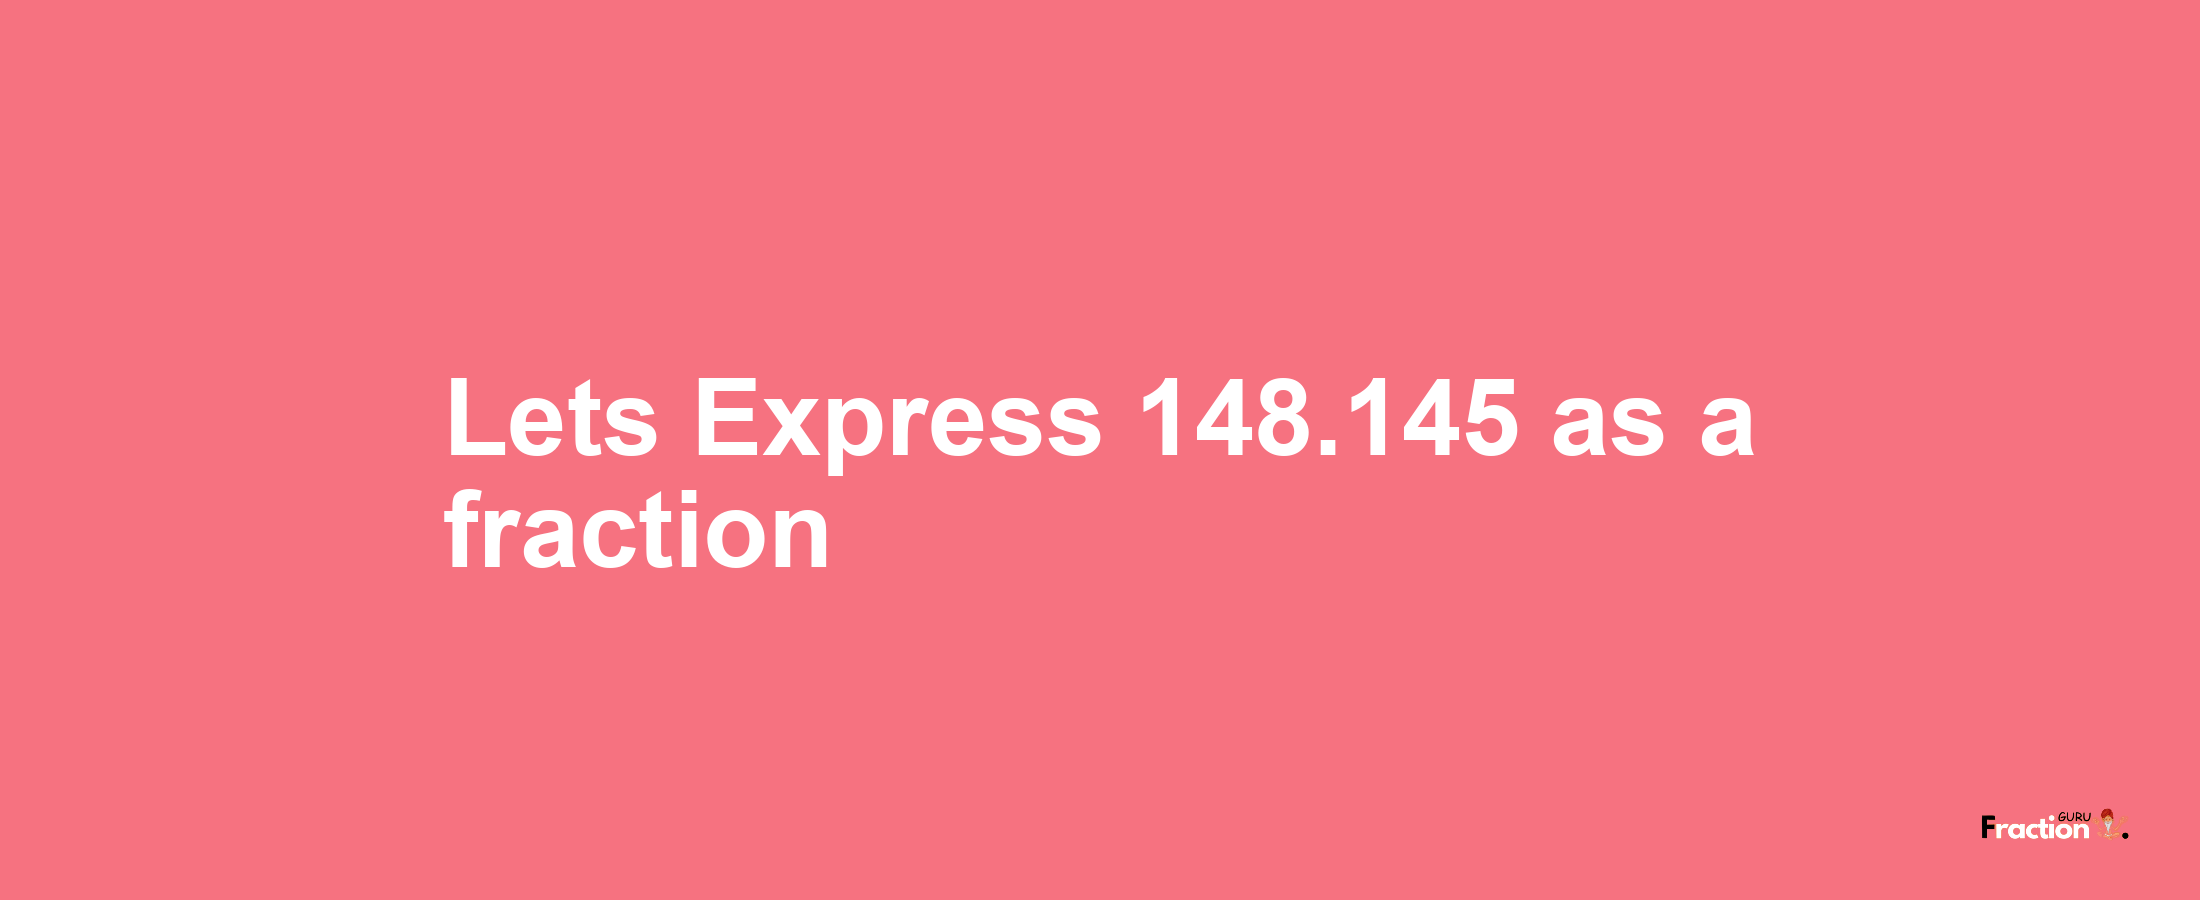 Lets Express 148.145 as afraction